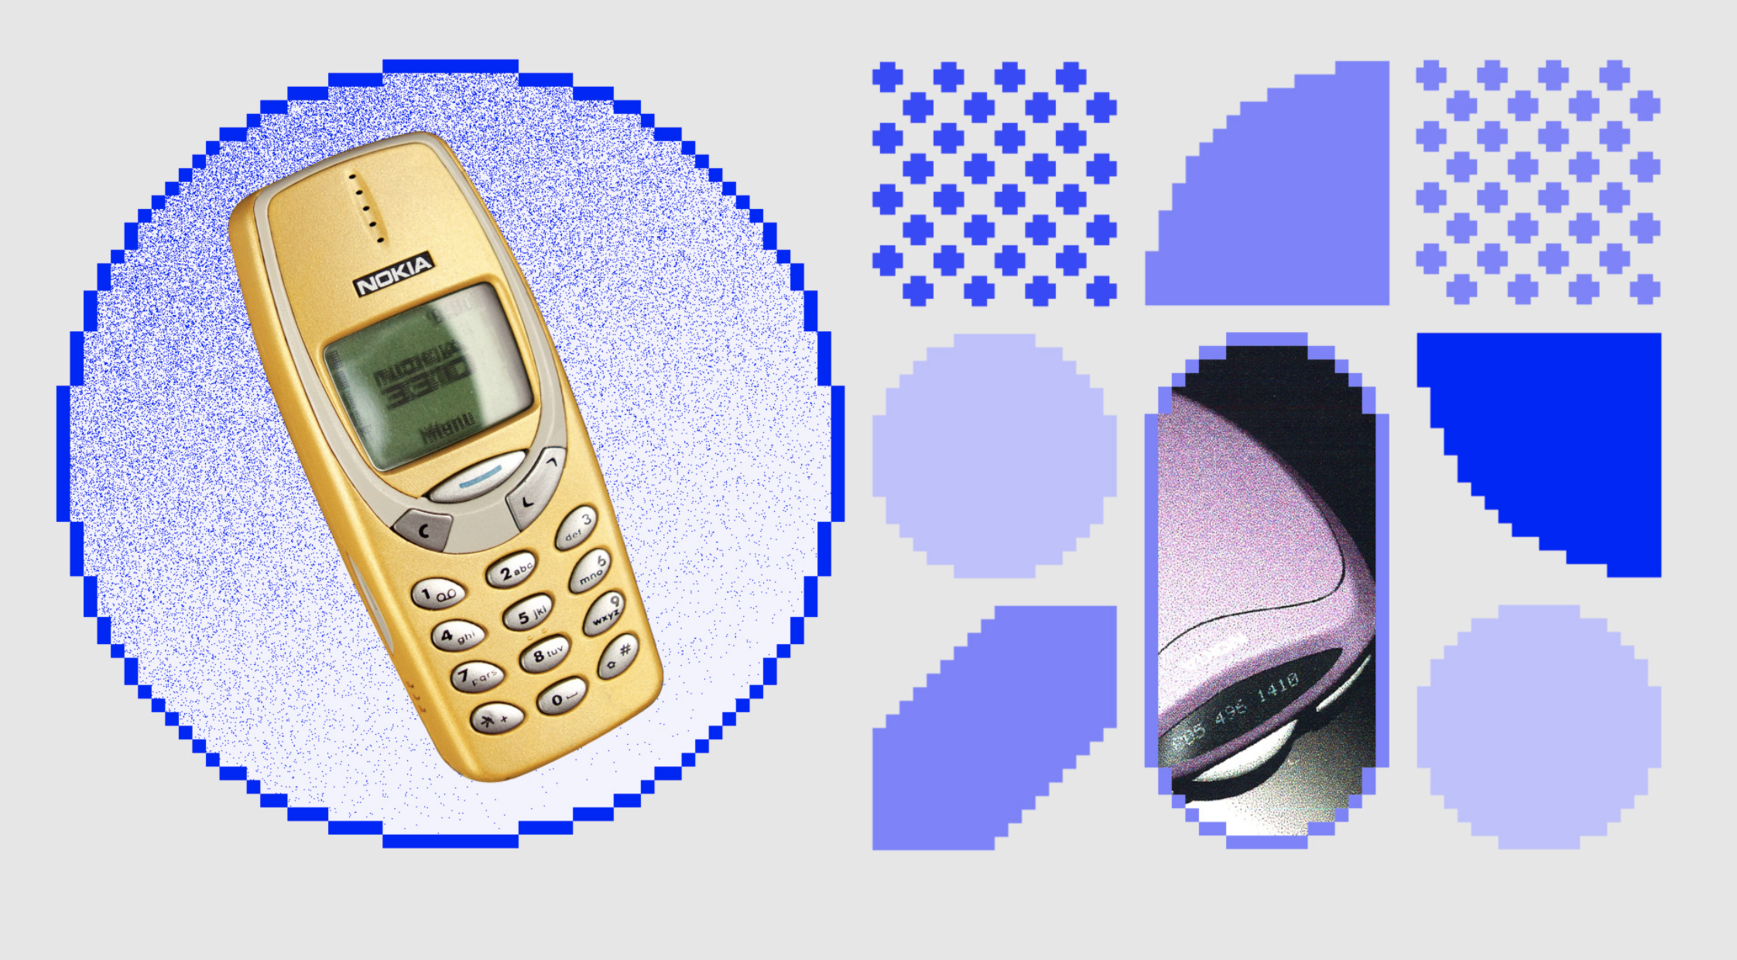 Nokia Design Archive project image. Graphic image with classic Nokia phone in pixelated purple shapes with grain effect